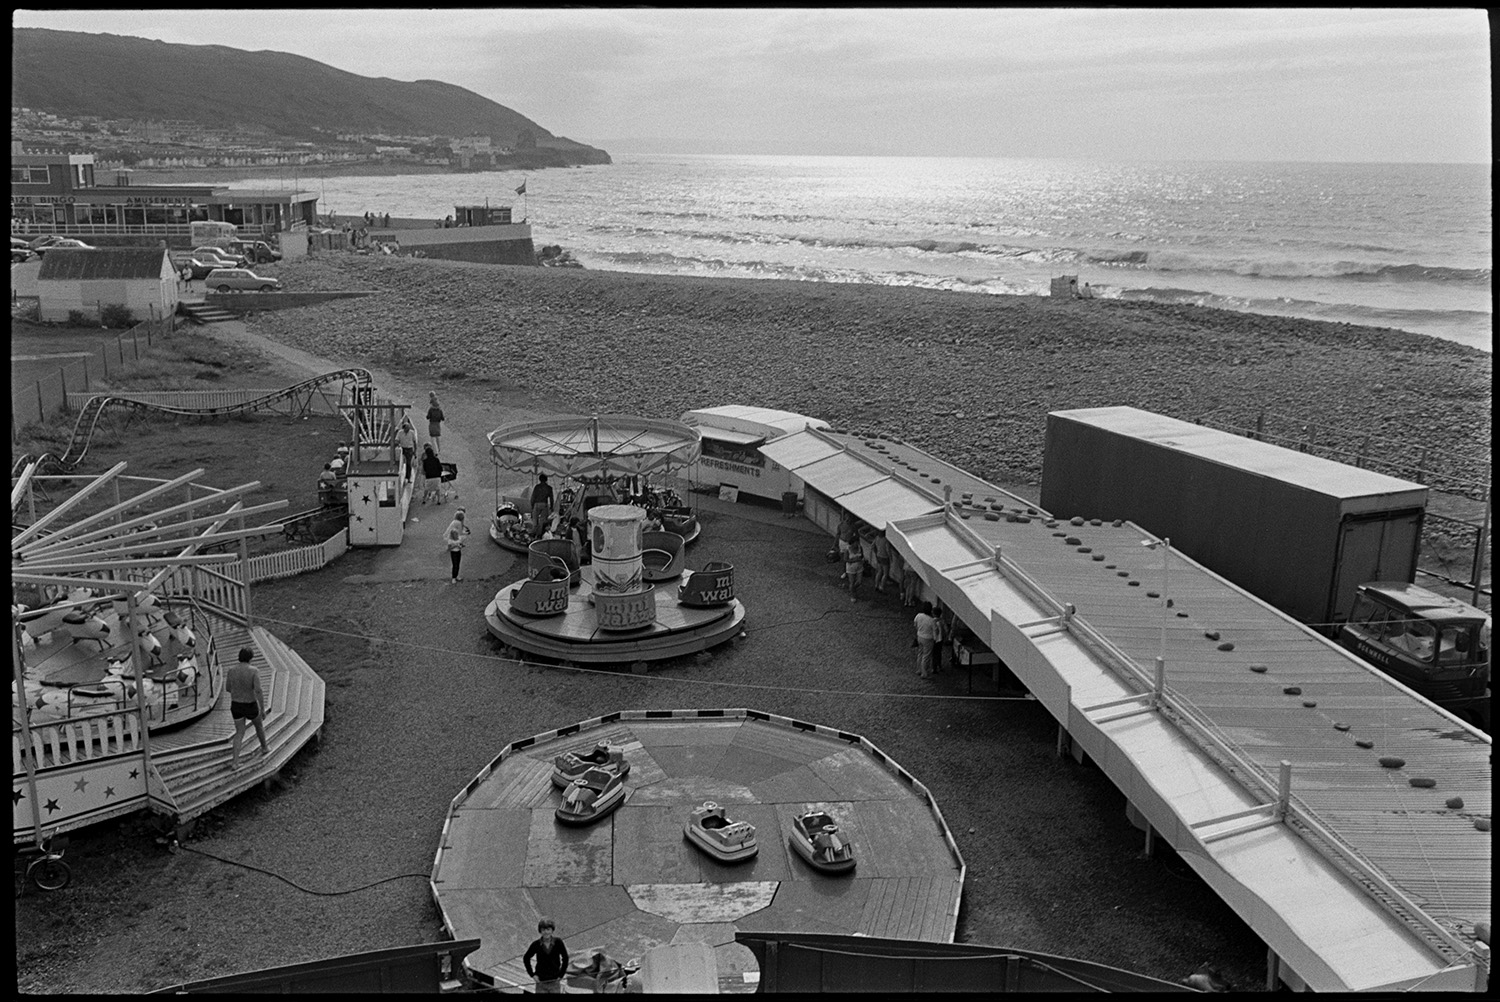 Seaside amusements, children. 
[An amusement park on Westward Ho! beach with rides. A small rollercoster, merry-go-round and dodgems are visible on the seafront.]